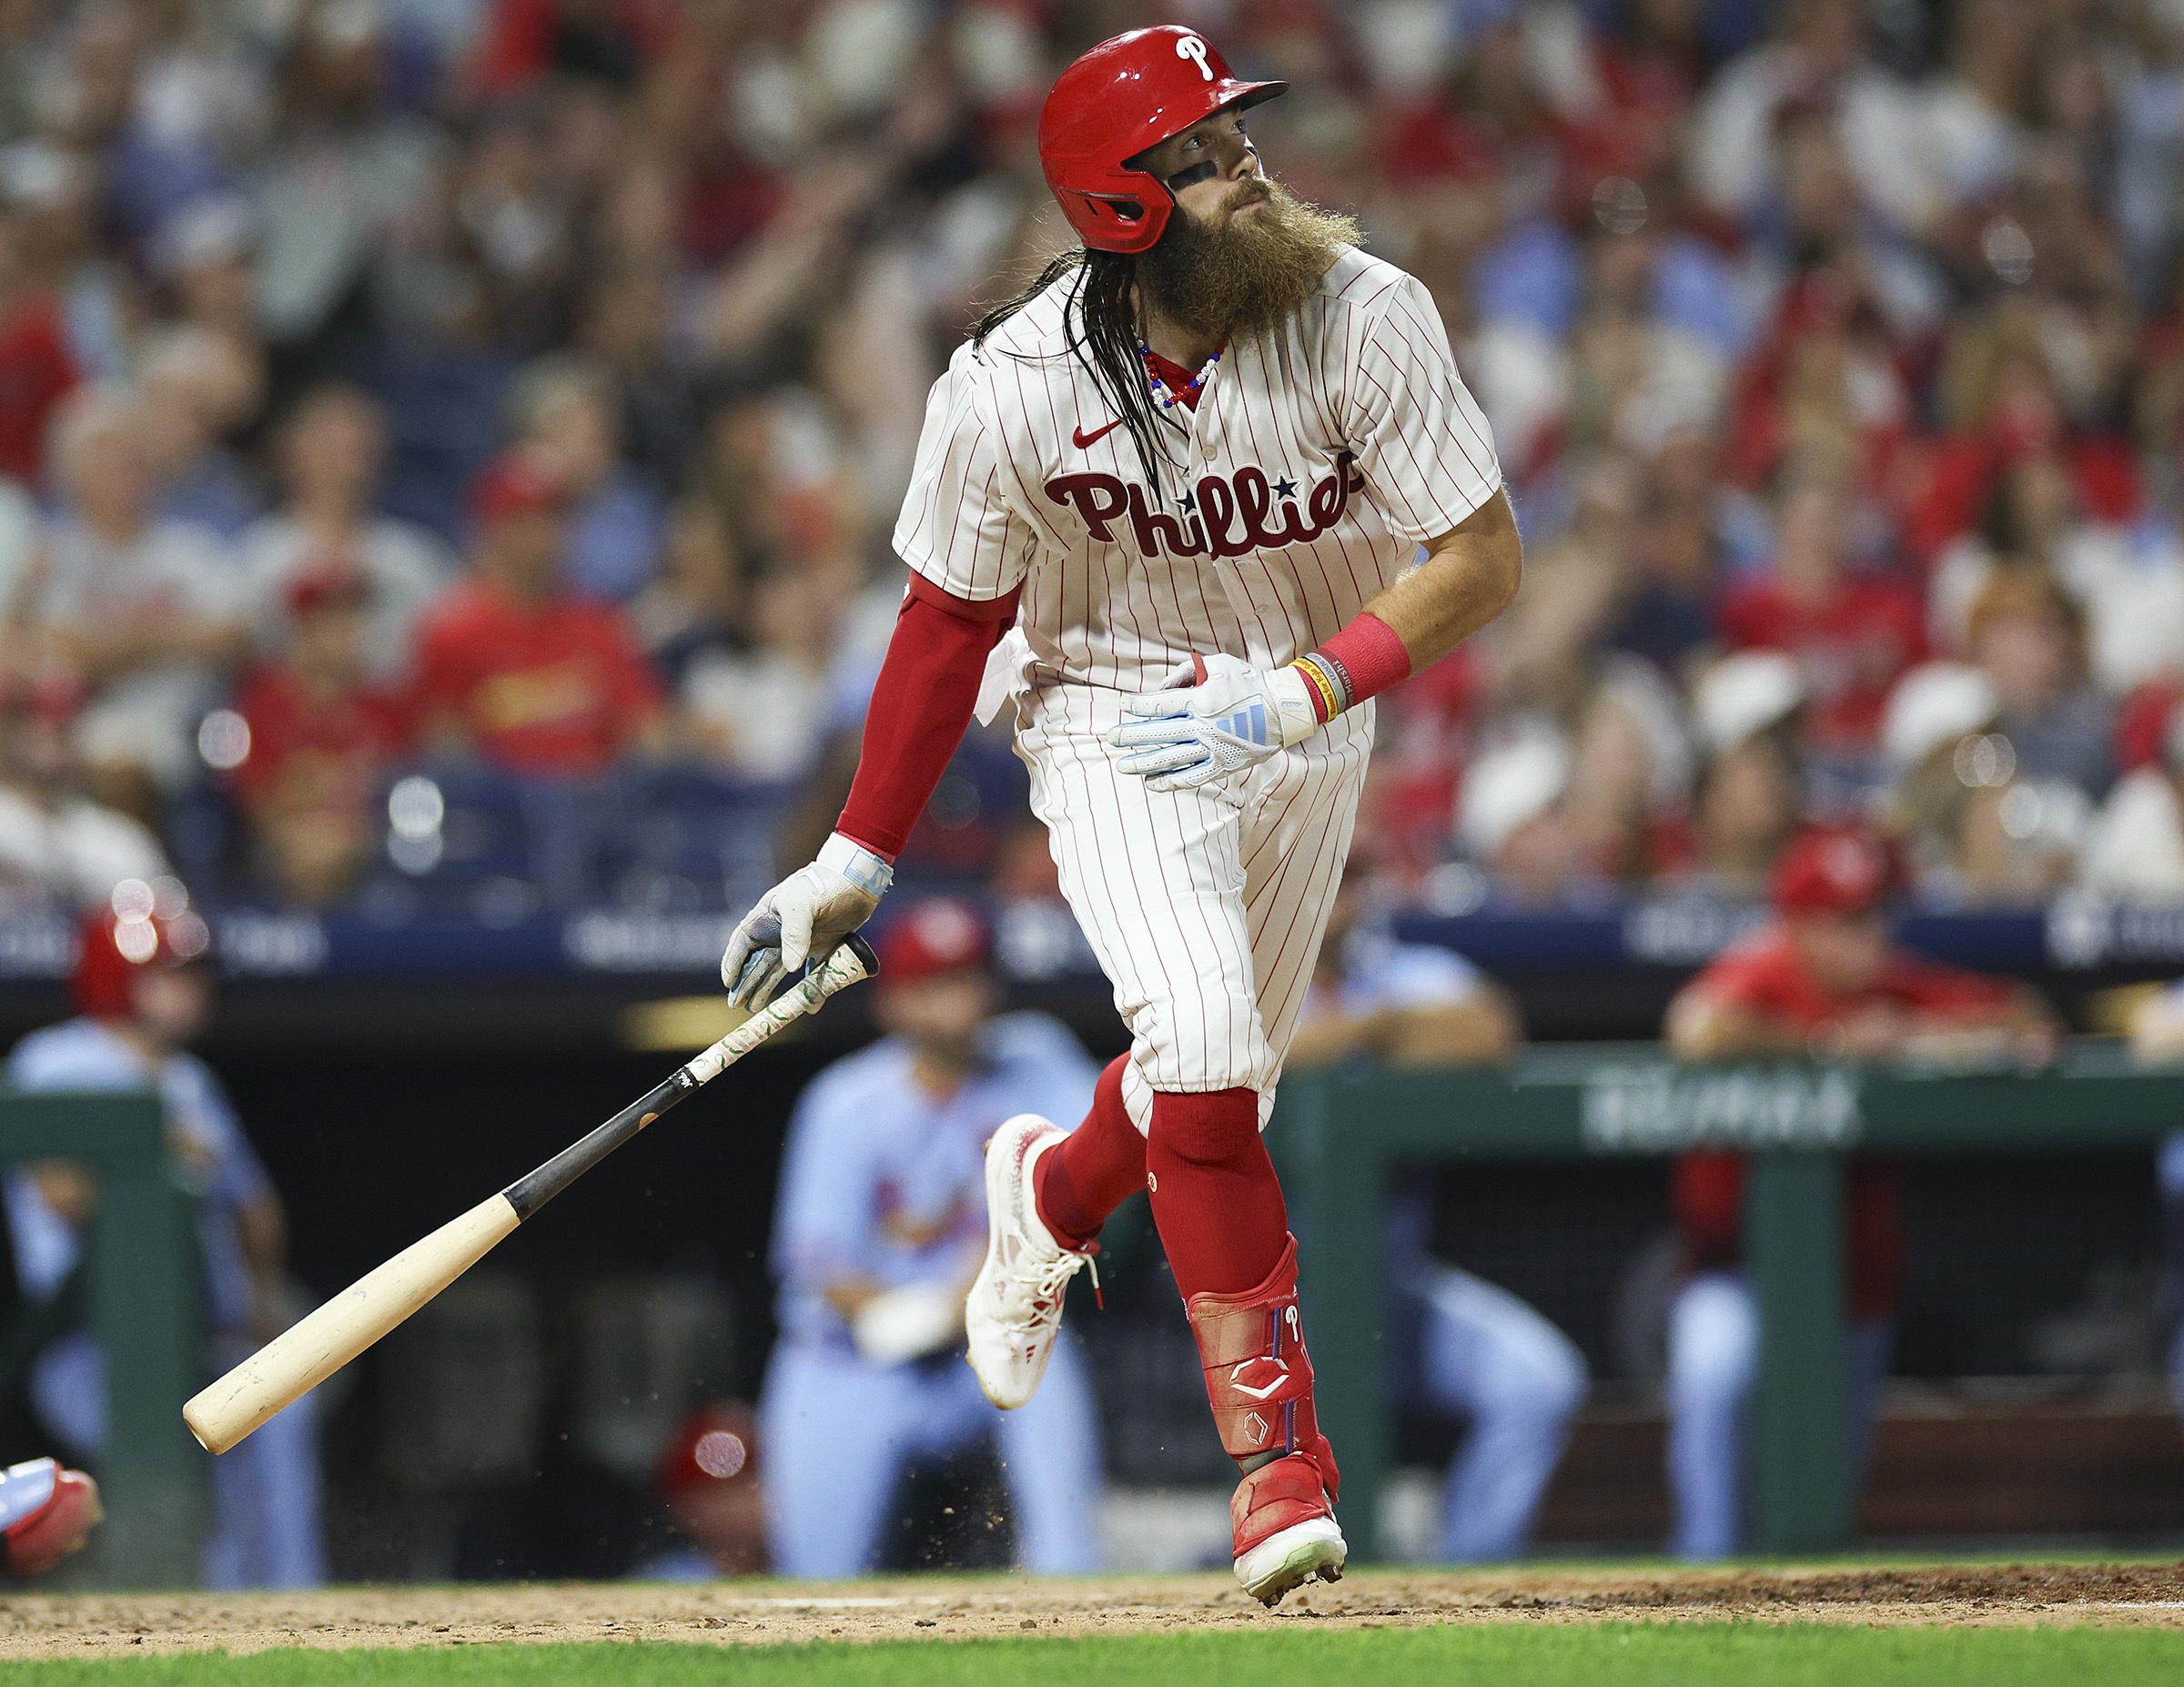 Cardinals get pummeled by the Phillies again in a 12-1 loss in Philadelphia